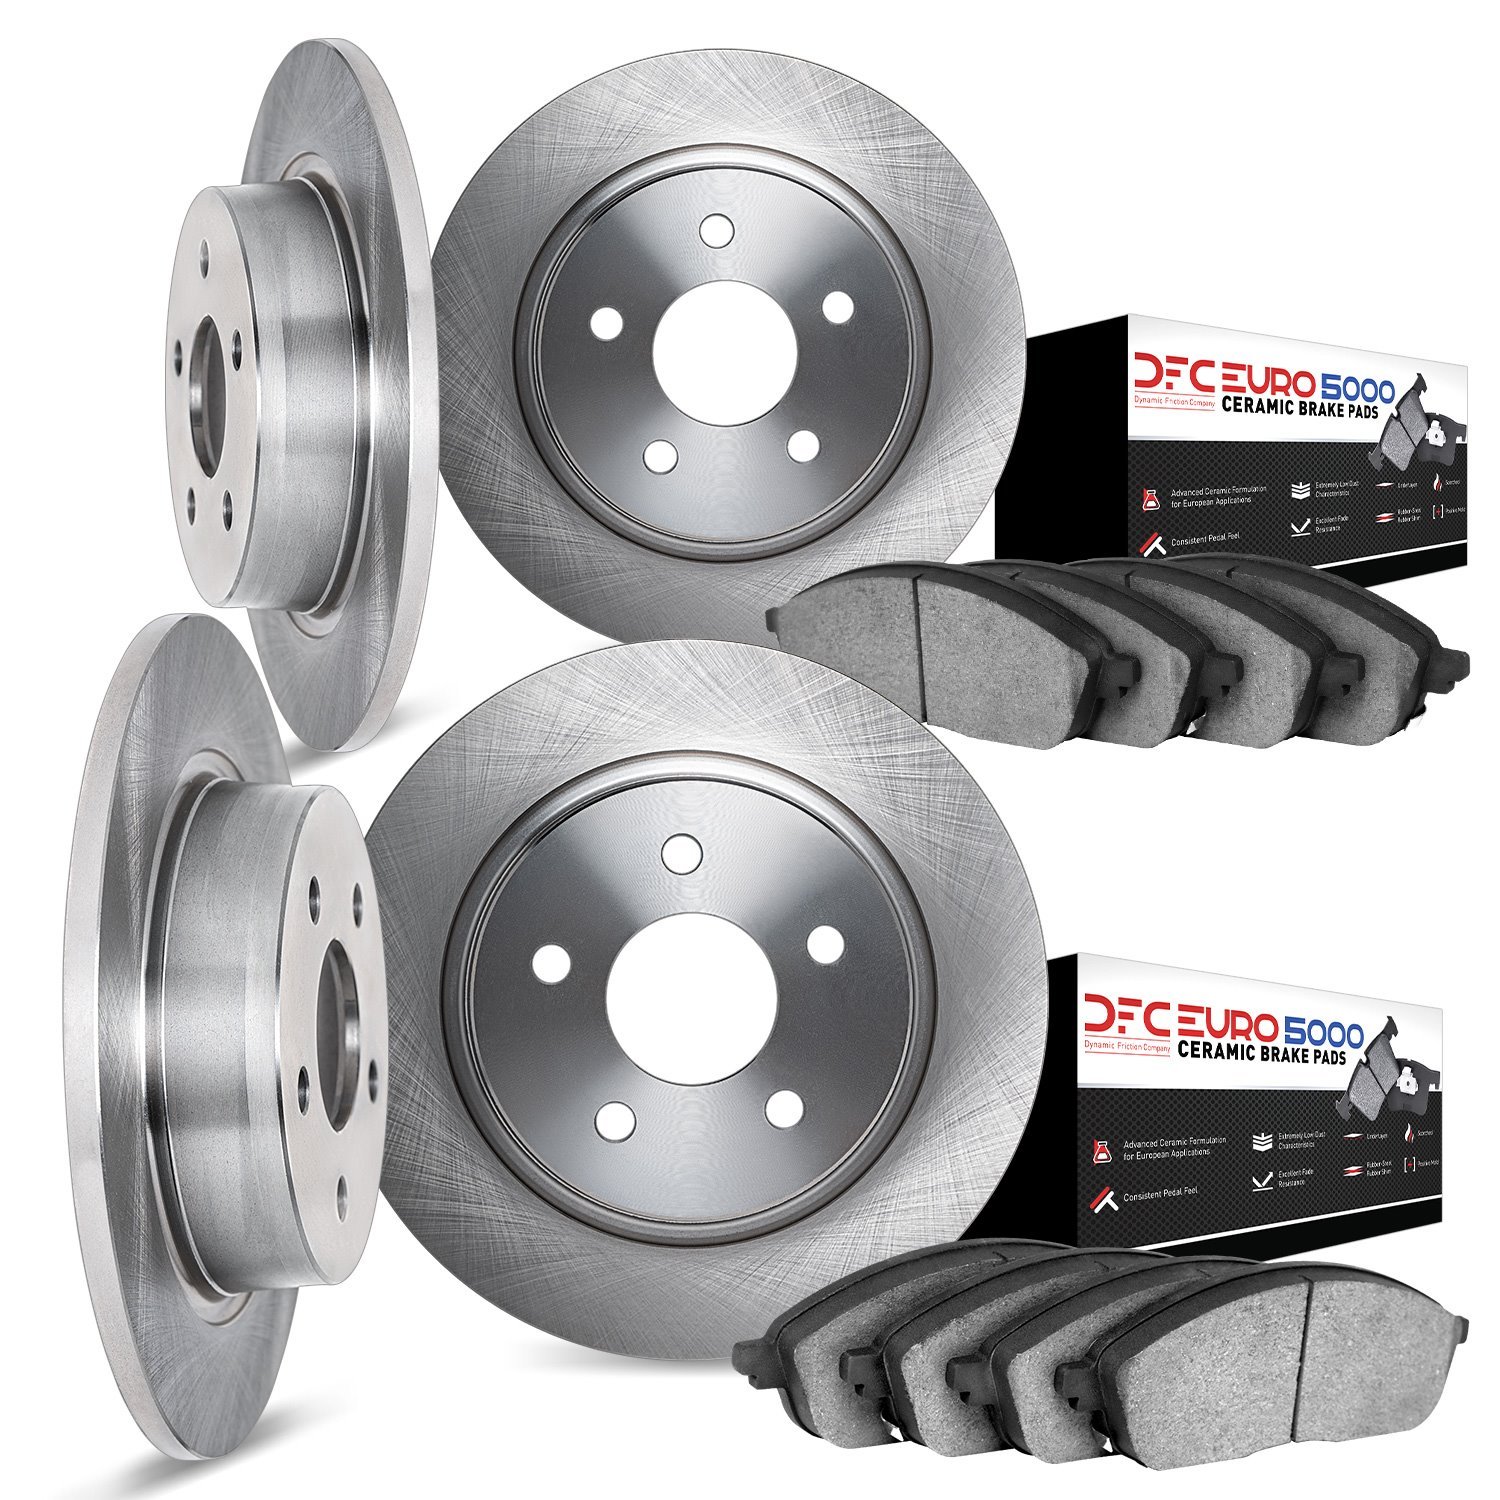 6604-63007 Brake Rotors w/5000 Euro Ceramic Brake Pads, 1973-1979 Mercedes-Benz, Position: Front and Rear